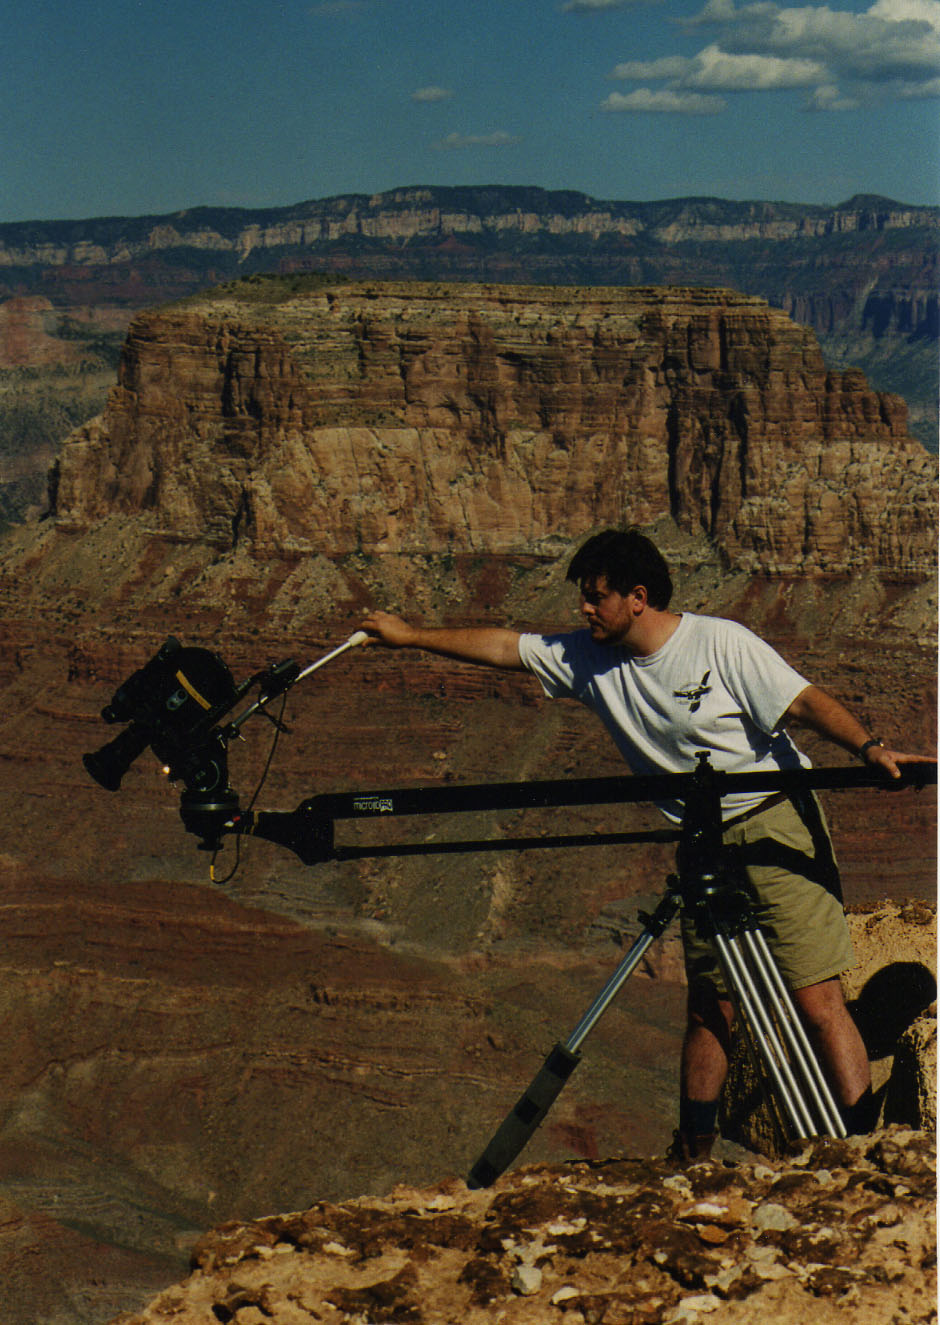 Filming on the north rim of the Grand Canyon for 'The Condor, The Coyote and The Canyon'.